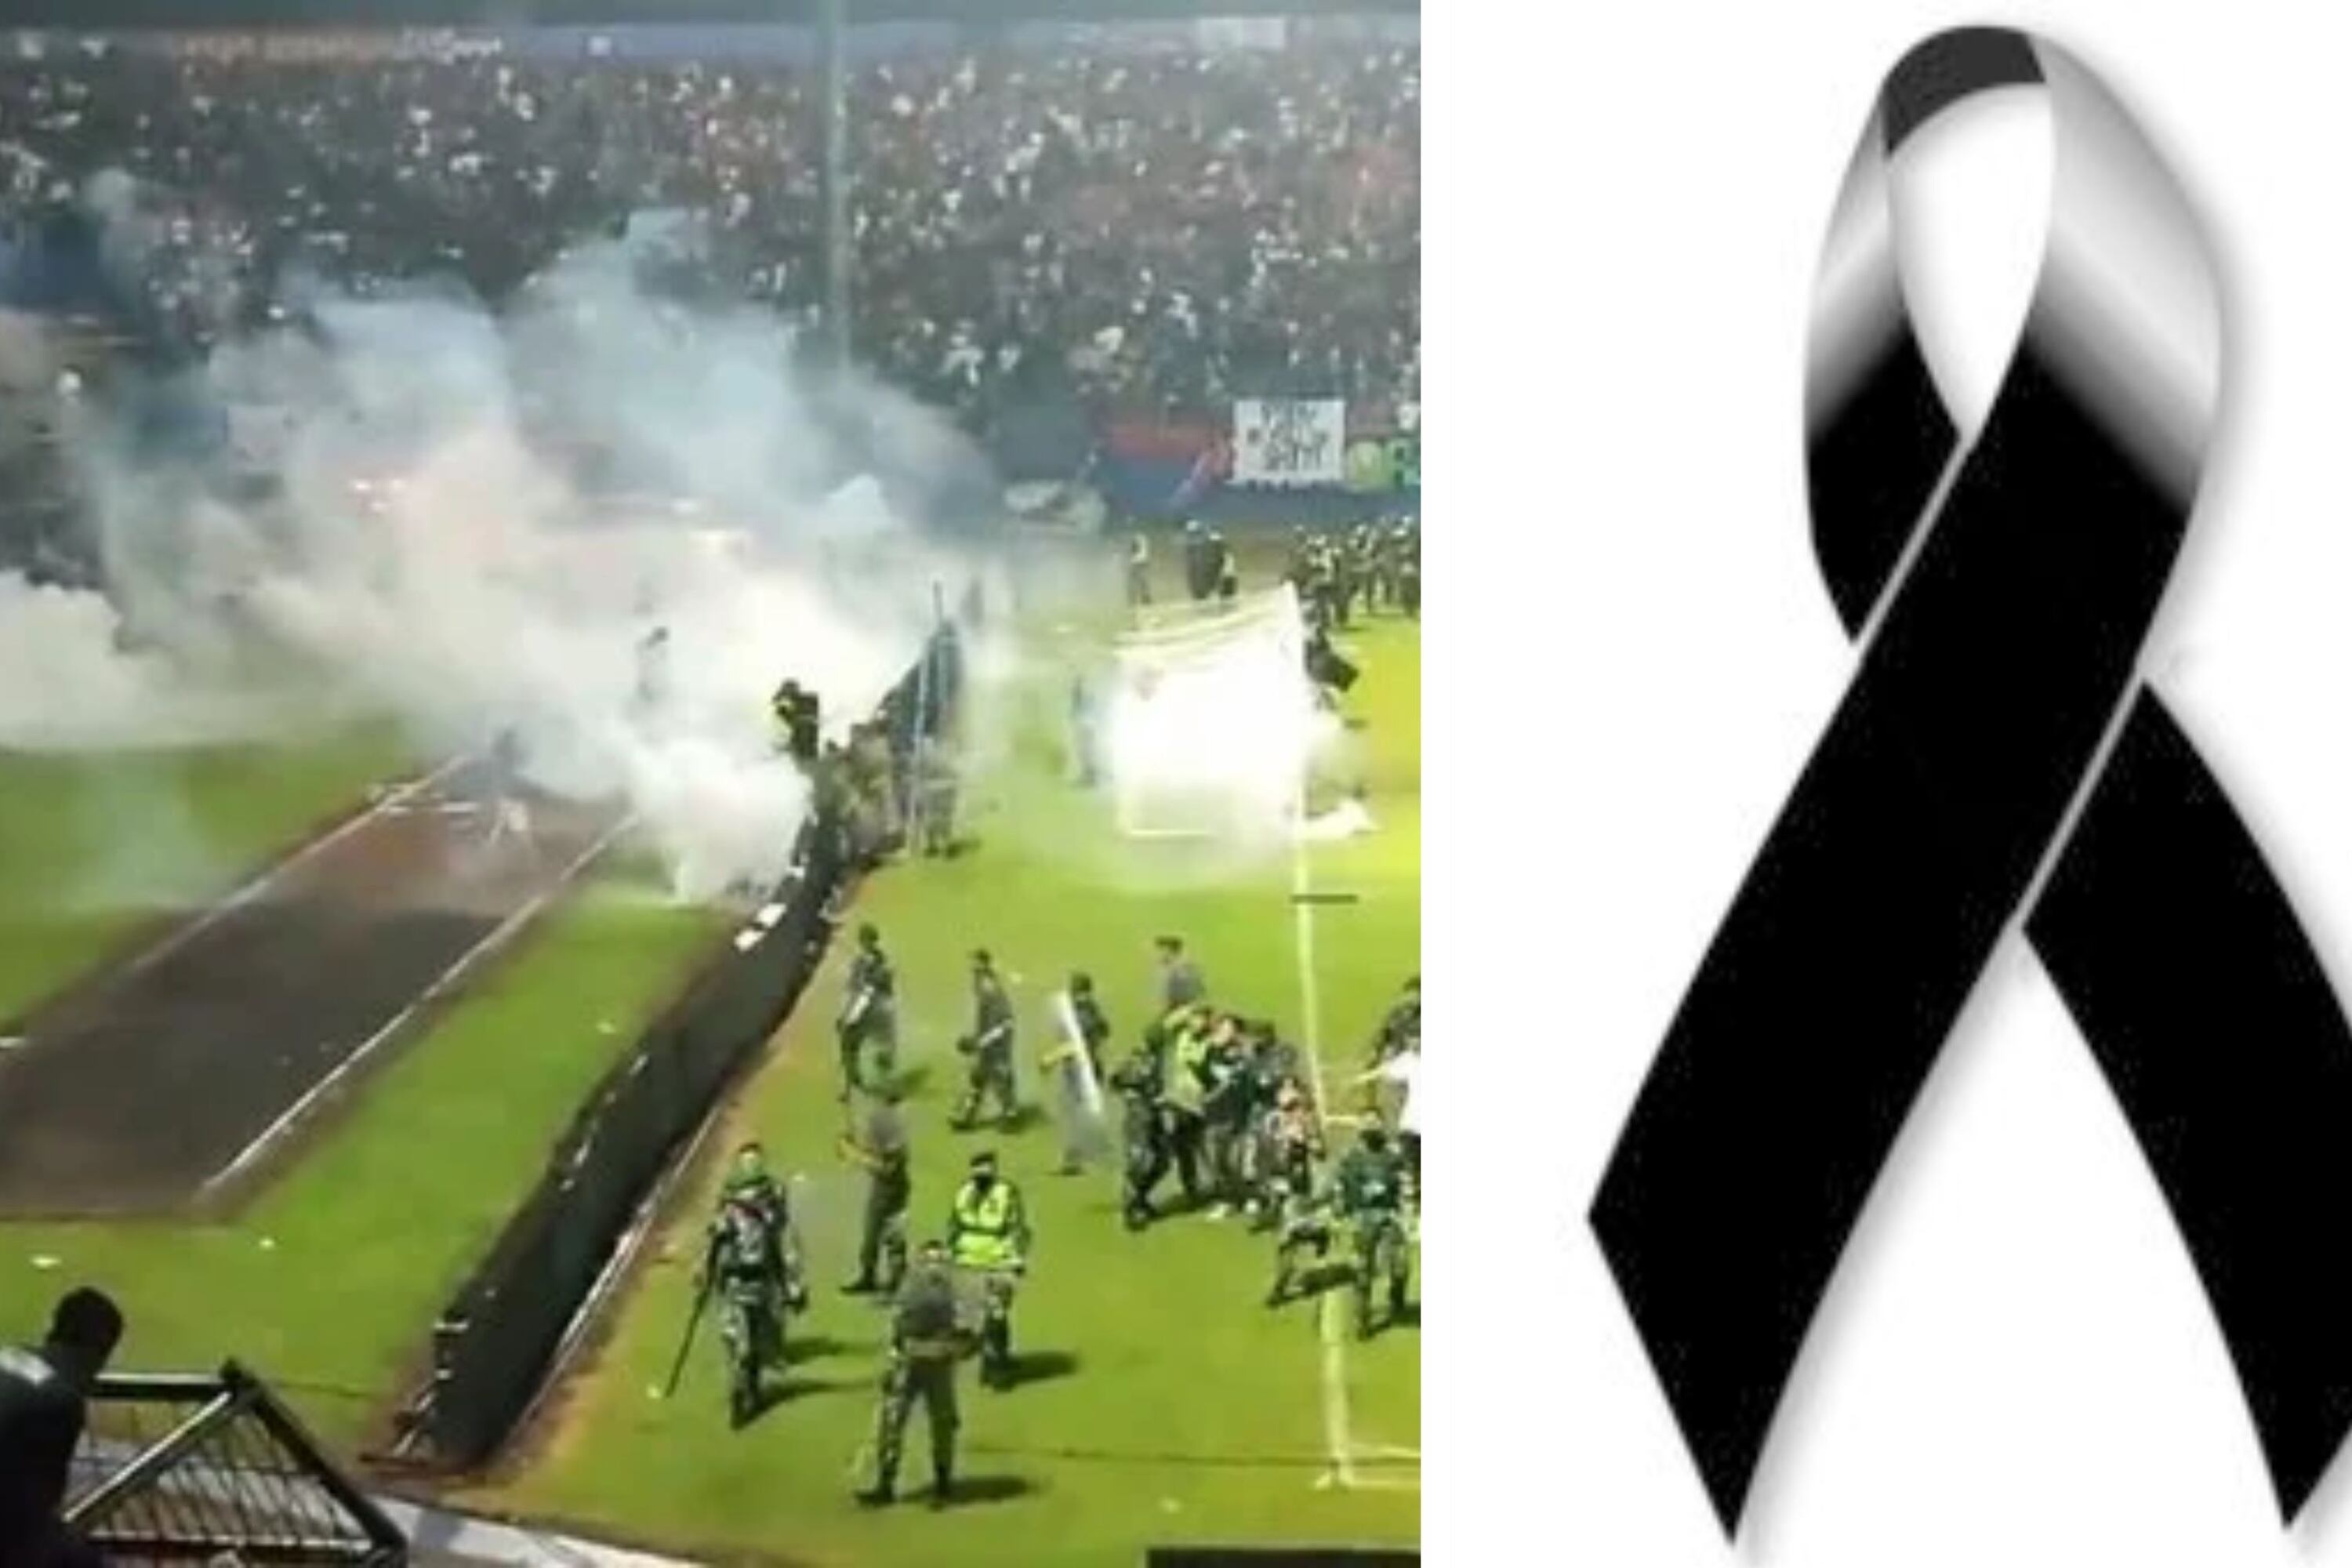 Overcame Querétaro vs Atlas, destruction and loss of 127 lives in one stadium at Indonesia